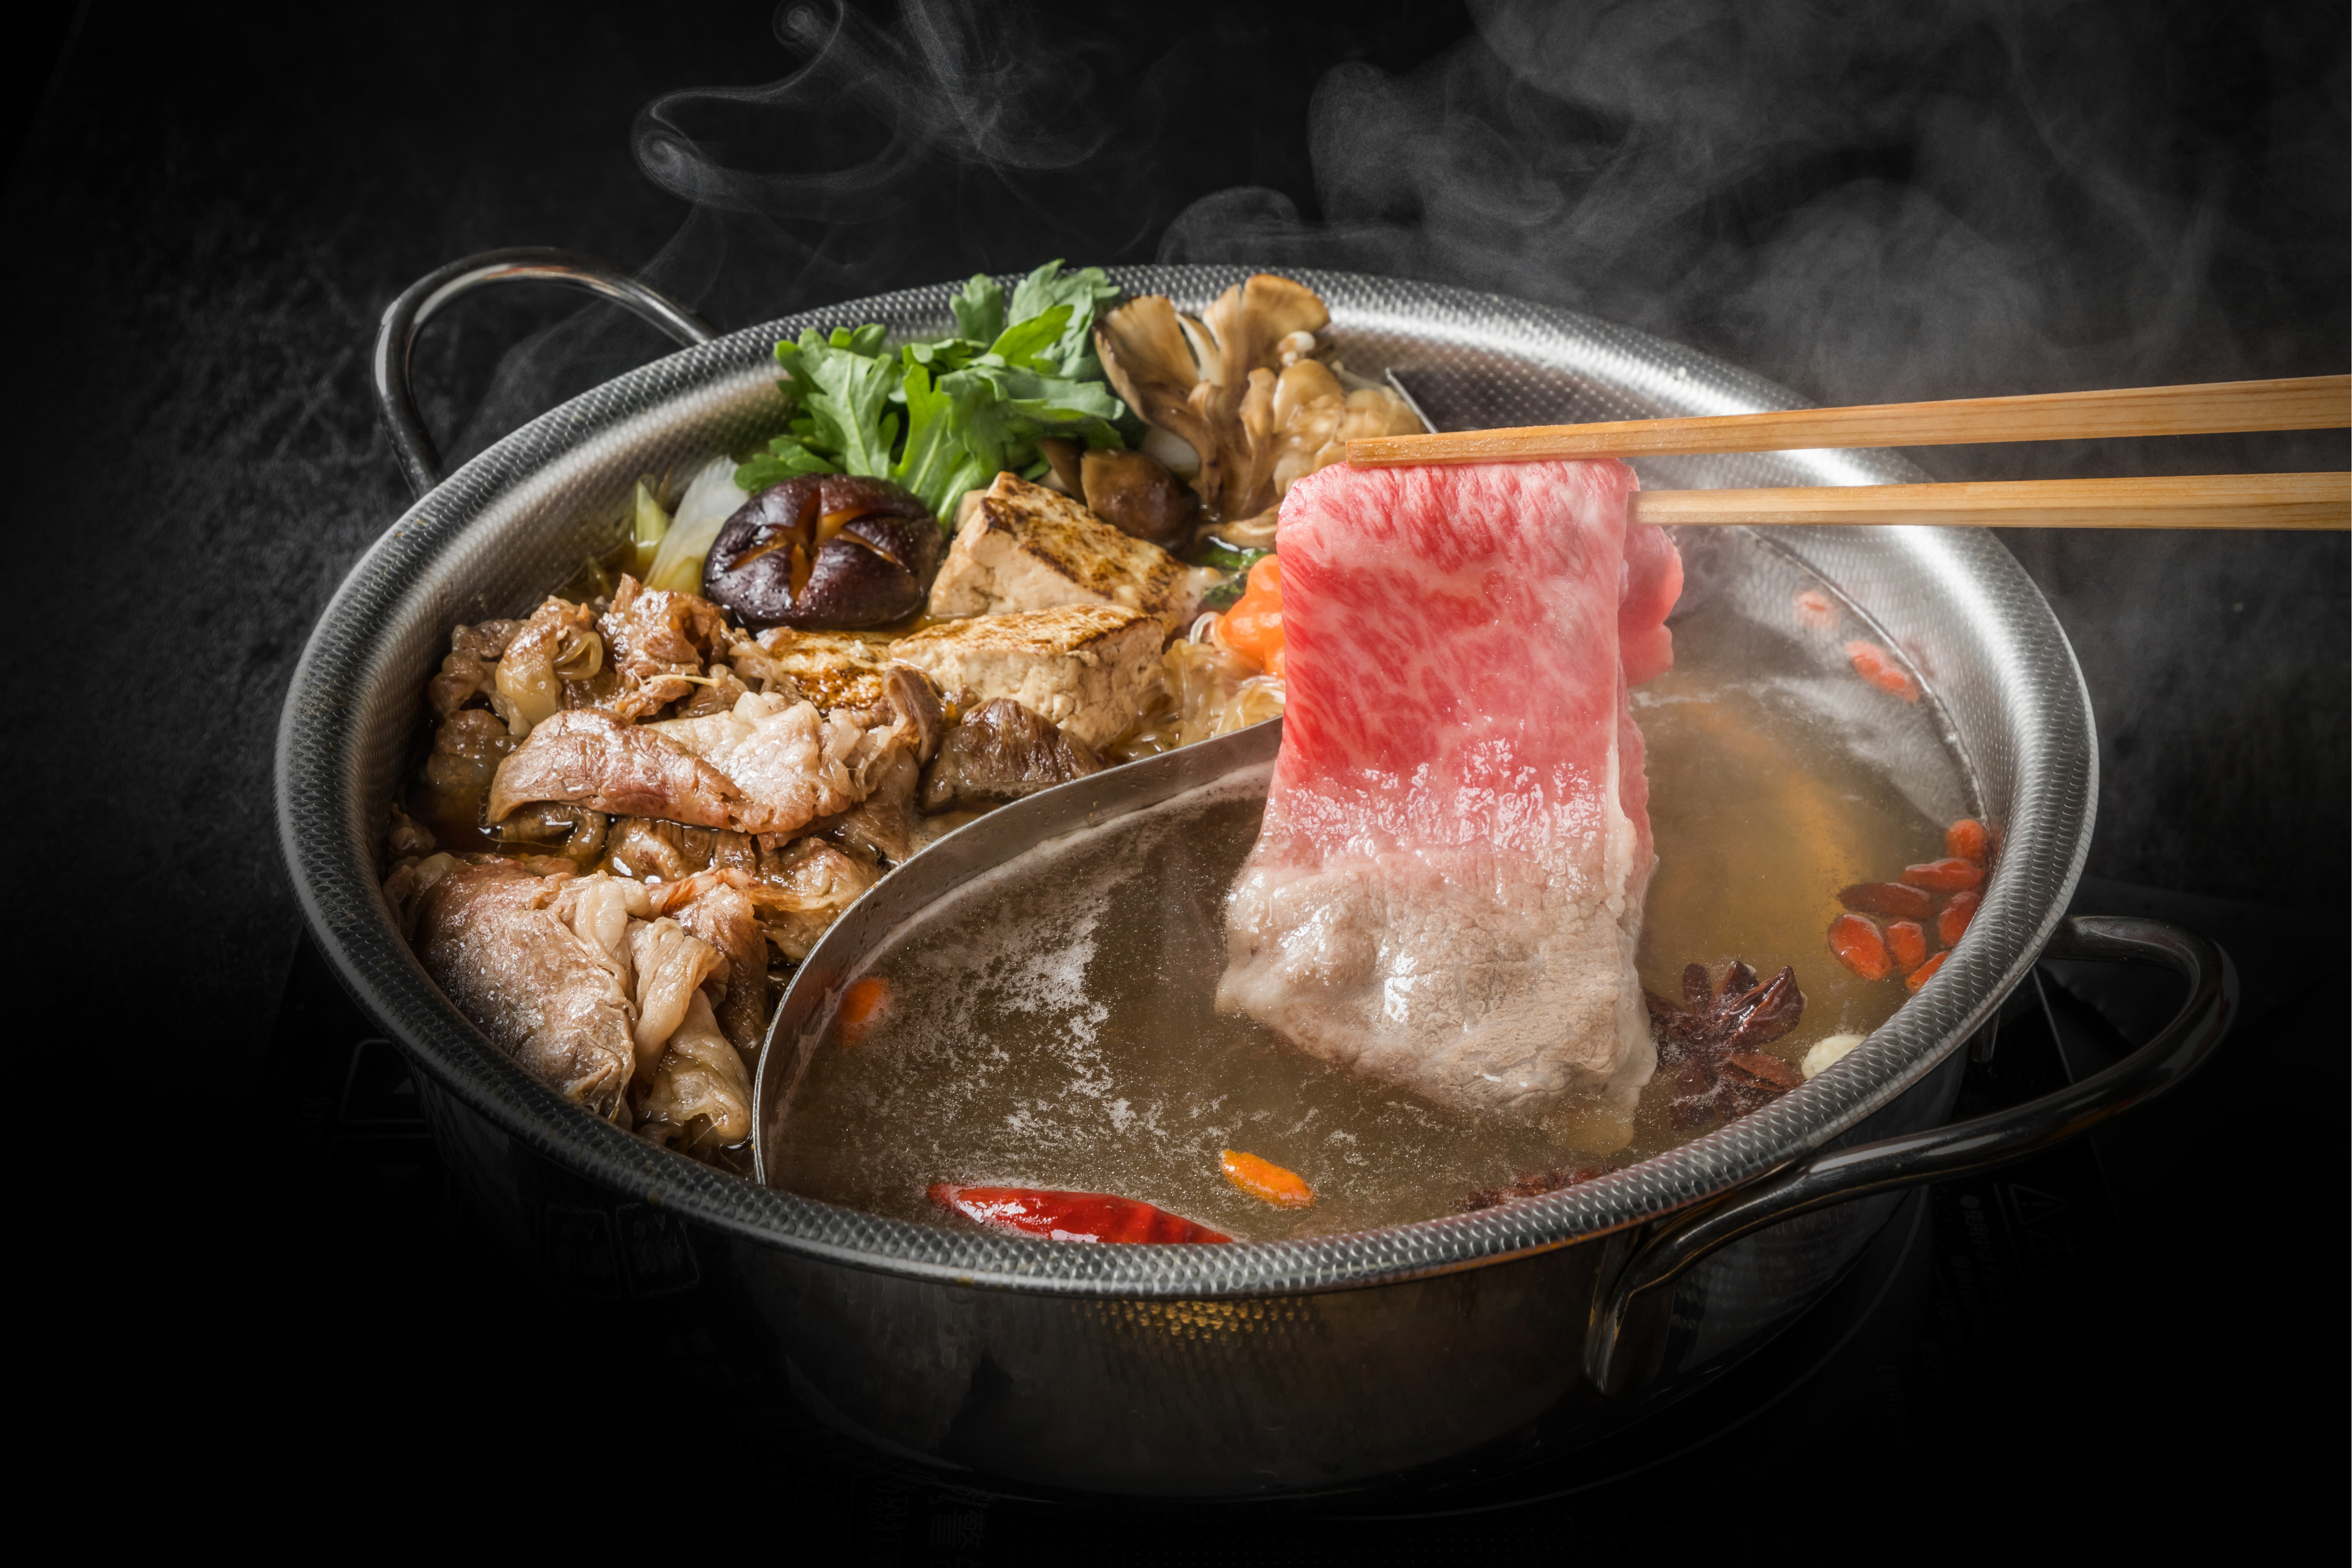 A pair of chopsticks holding a piece of meat over a bowl of Chinese hot pot soup